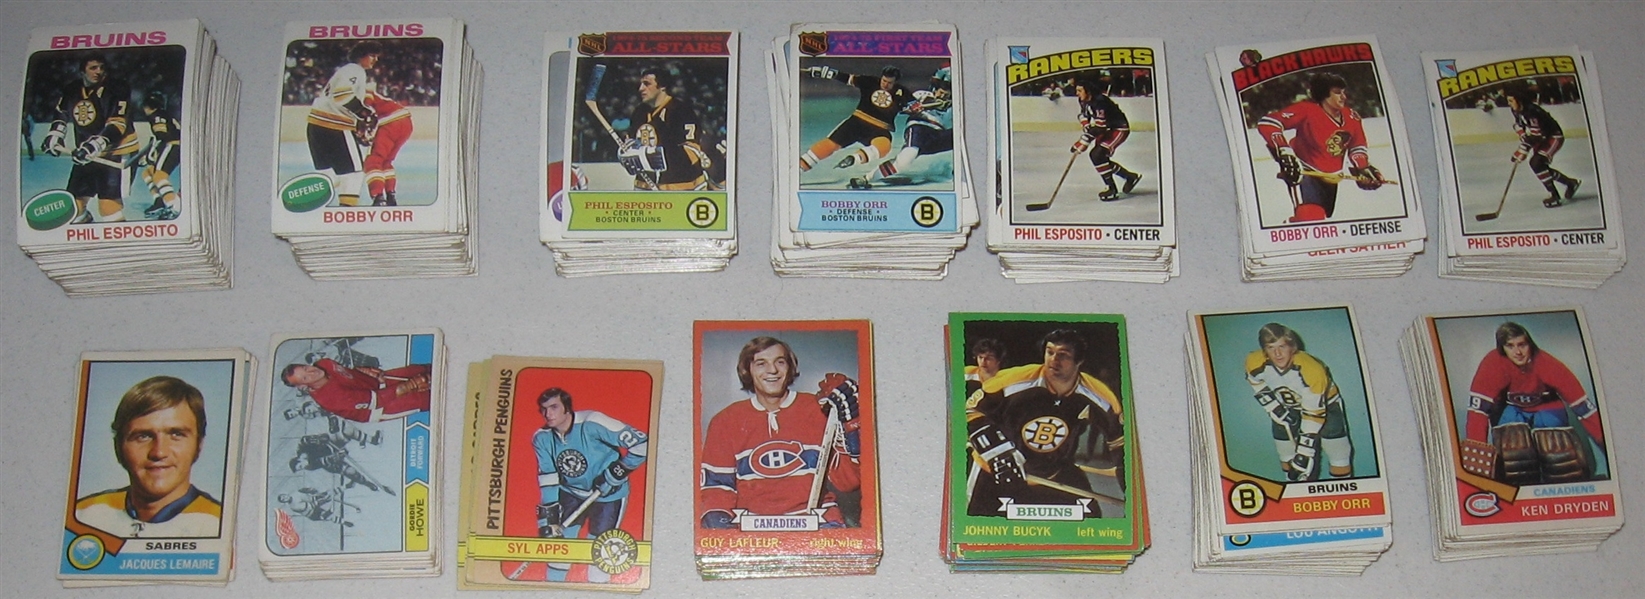 1968-77 Topps Hockey Lot of (640) W/ Orr, Howe, P. Esposito & More